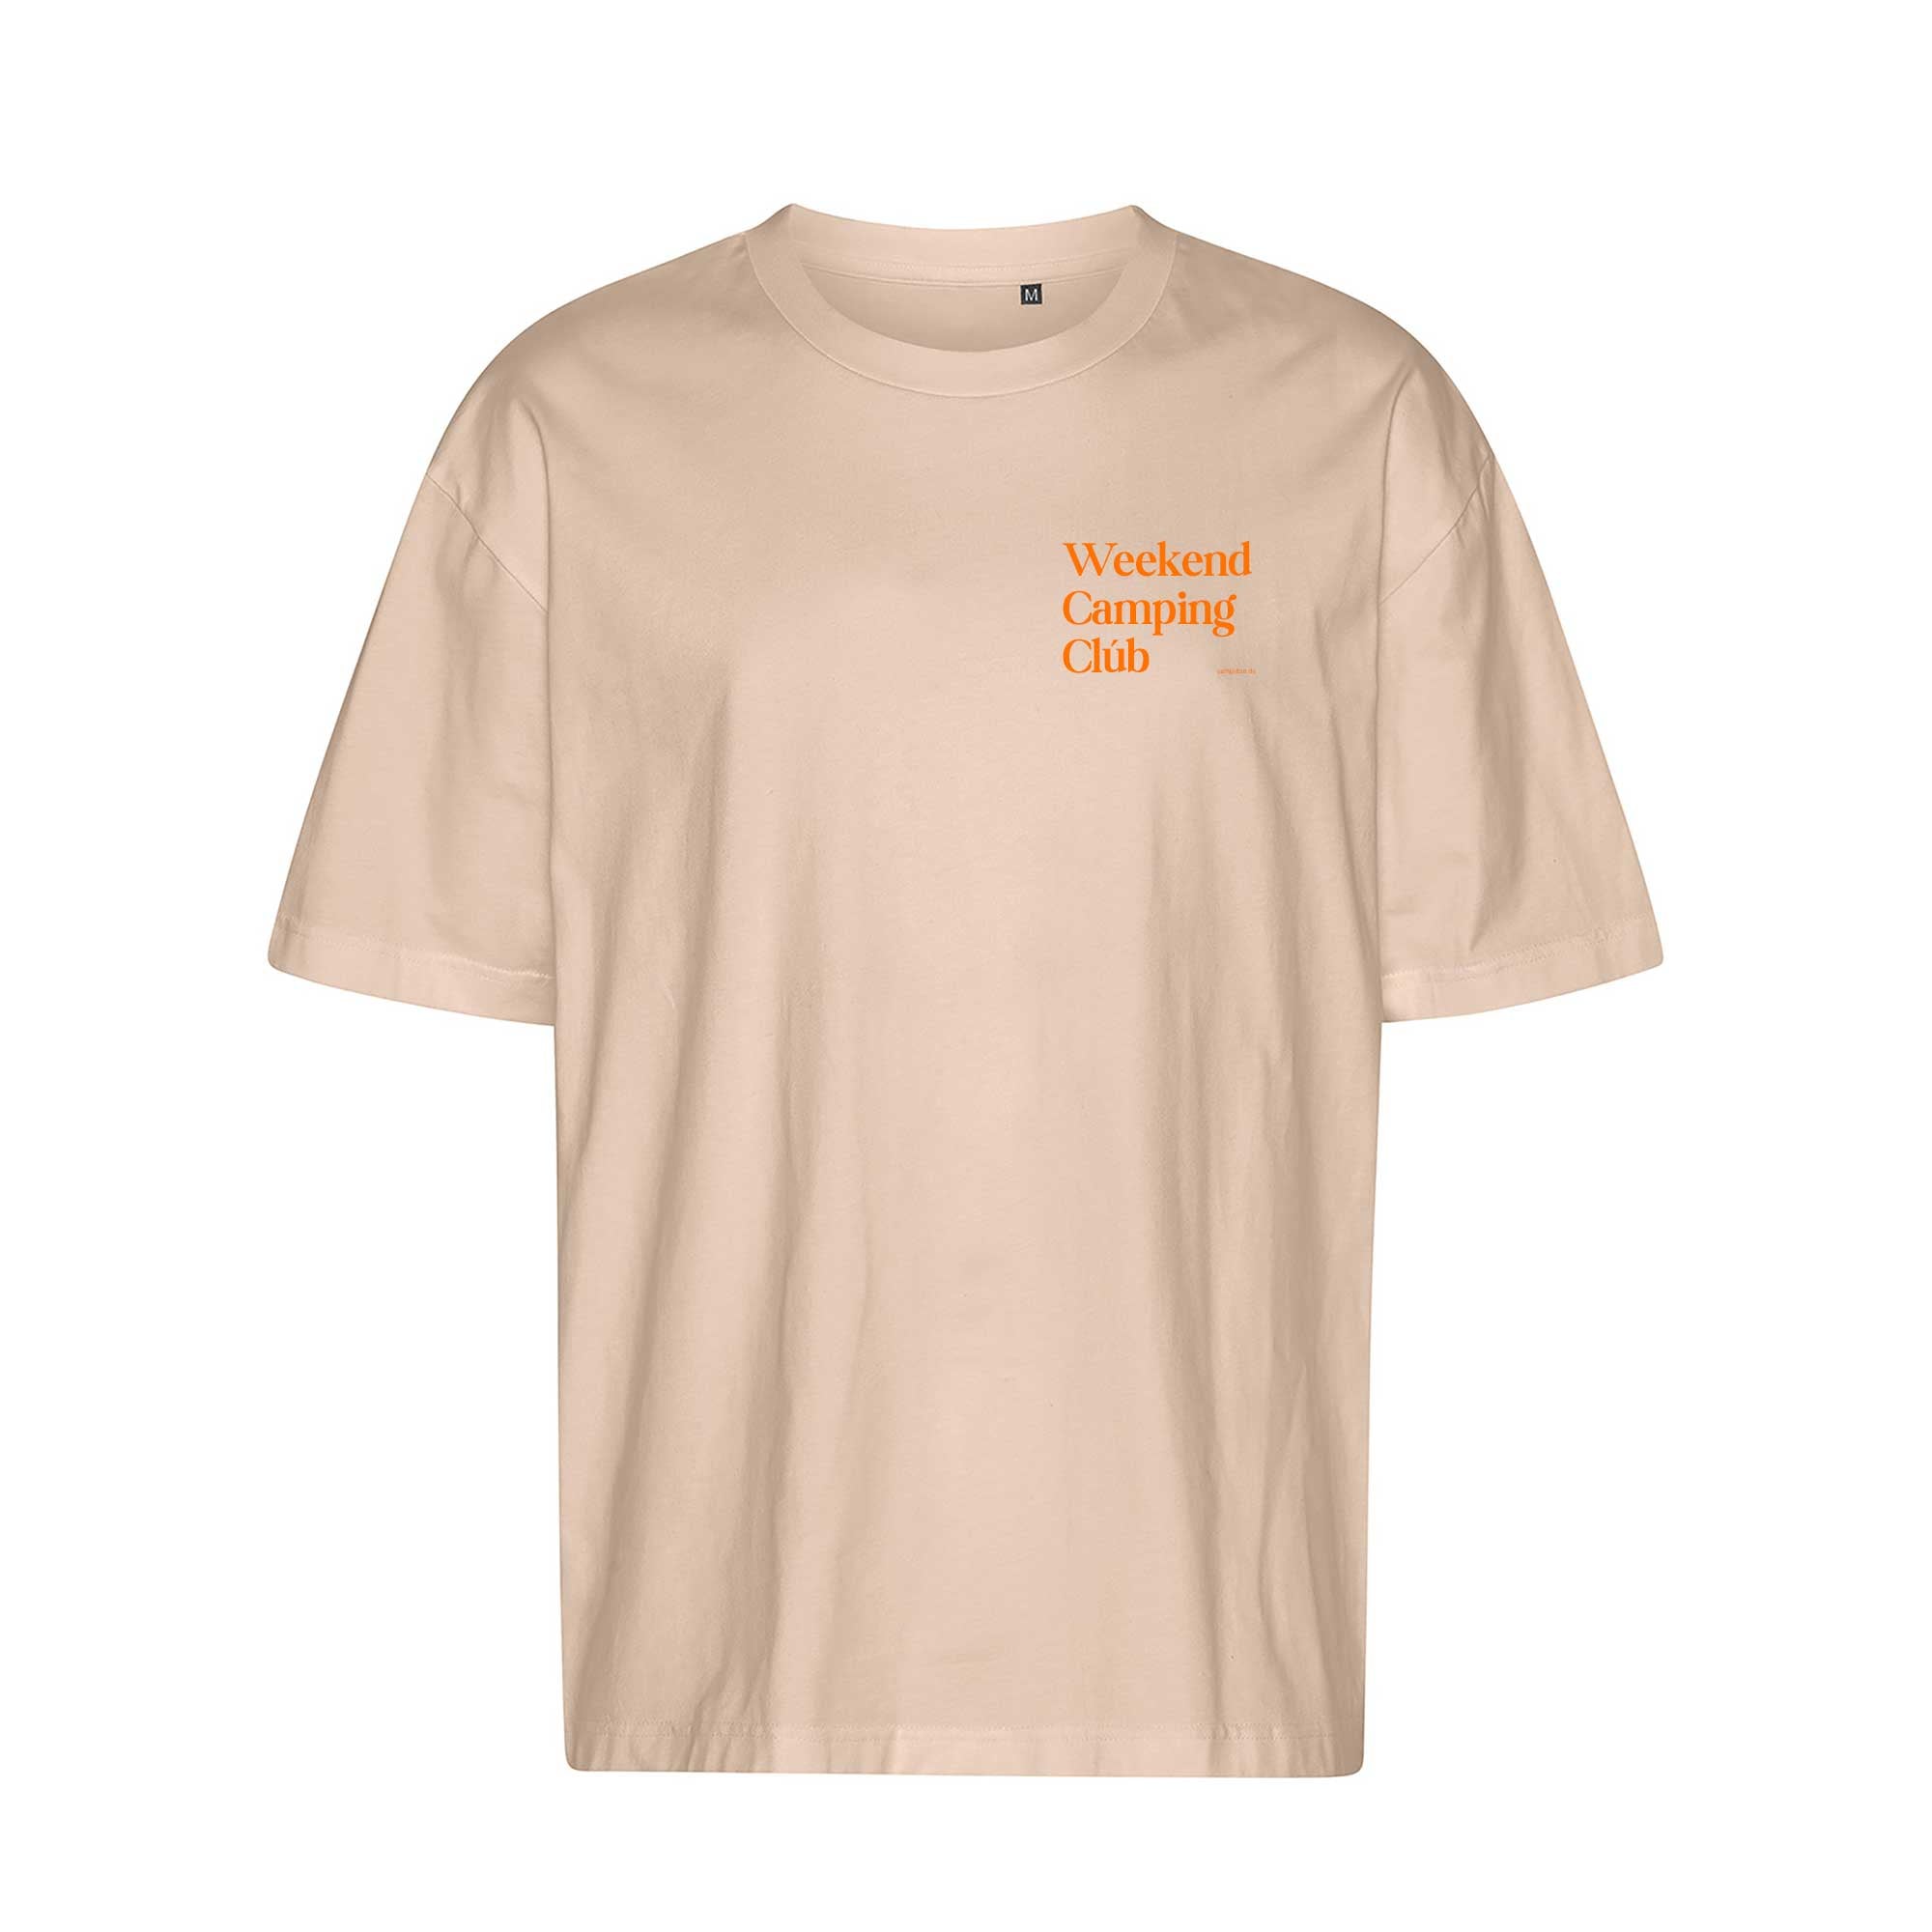 Oversized T-Shirt SAND "Weekend Camping Club"